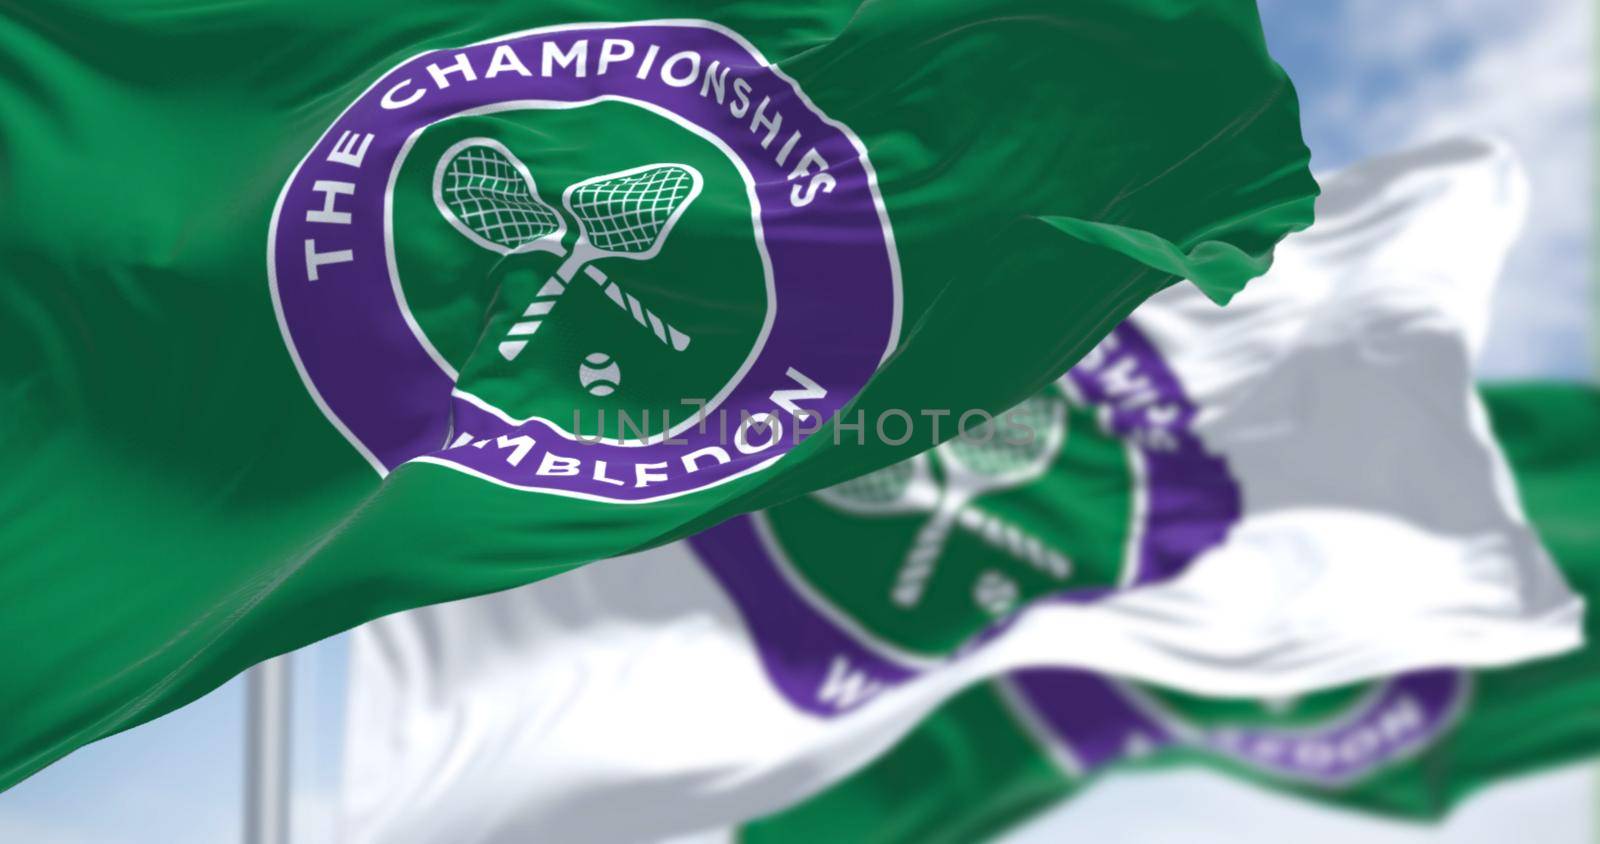 London, UK, April 2022: three flags with the The Championships Wimbledon logo waving in the wind. Wimbledon Championships is a major tennis tournament scheduled in late June each year